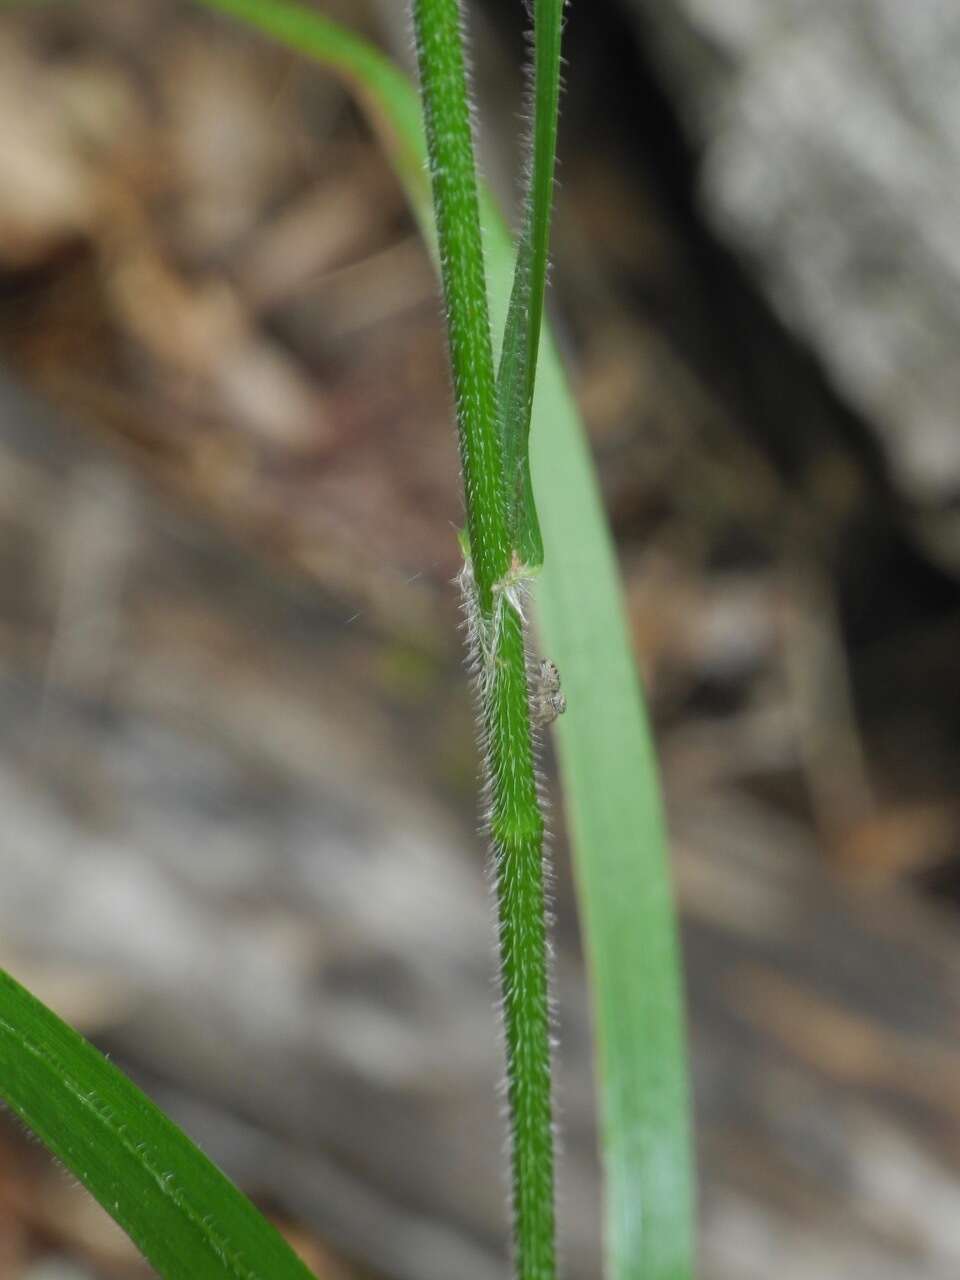 Image of Nottoway Valley brome